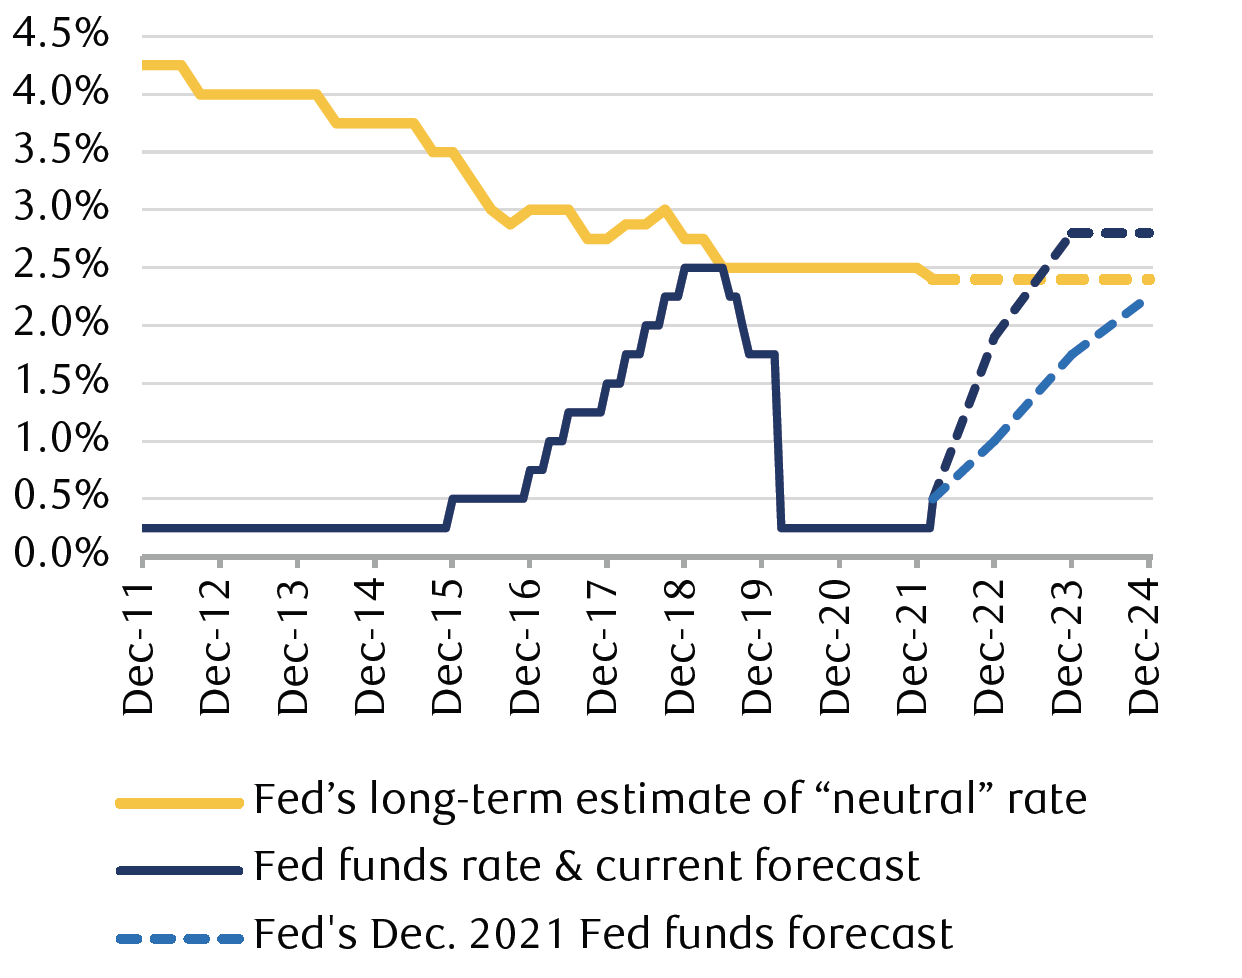 The line chart shows the fed funds rate and the Fed’s estimate of the “neutral” rate for the economy from December 2011 through March 16, 2022, and the Fed’s projections through 2024. The most recent fed funds rate forecast shows a steeper increase than the December 2021 forecast, and projects that the fed funds rate will reach 2.8% by the end of 2023, exceeding the projected neural rate level of 2.4%.